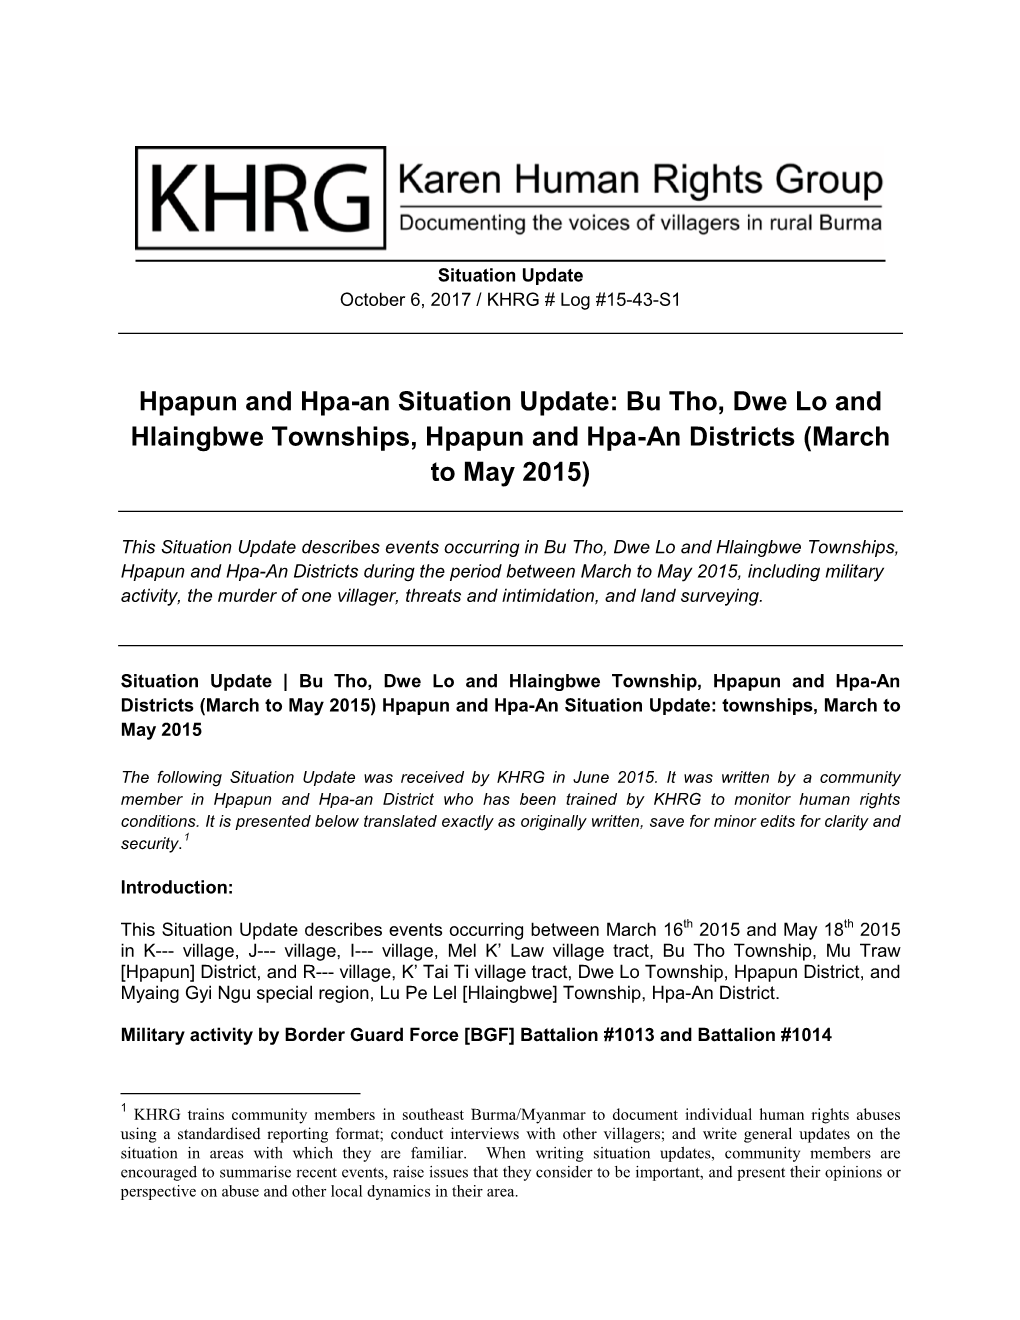 Hpapun and Hpa-An Situation Update: Bu Tho, Dwe Lo and Hlaingbwe Townships, Hpapun and Hpa-An Districts (March to May 2015)